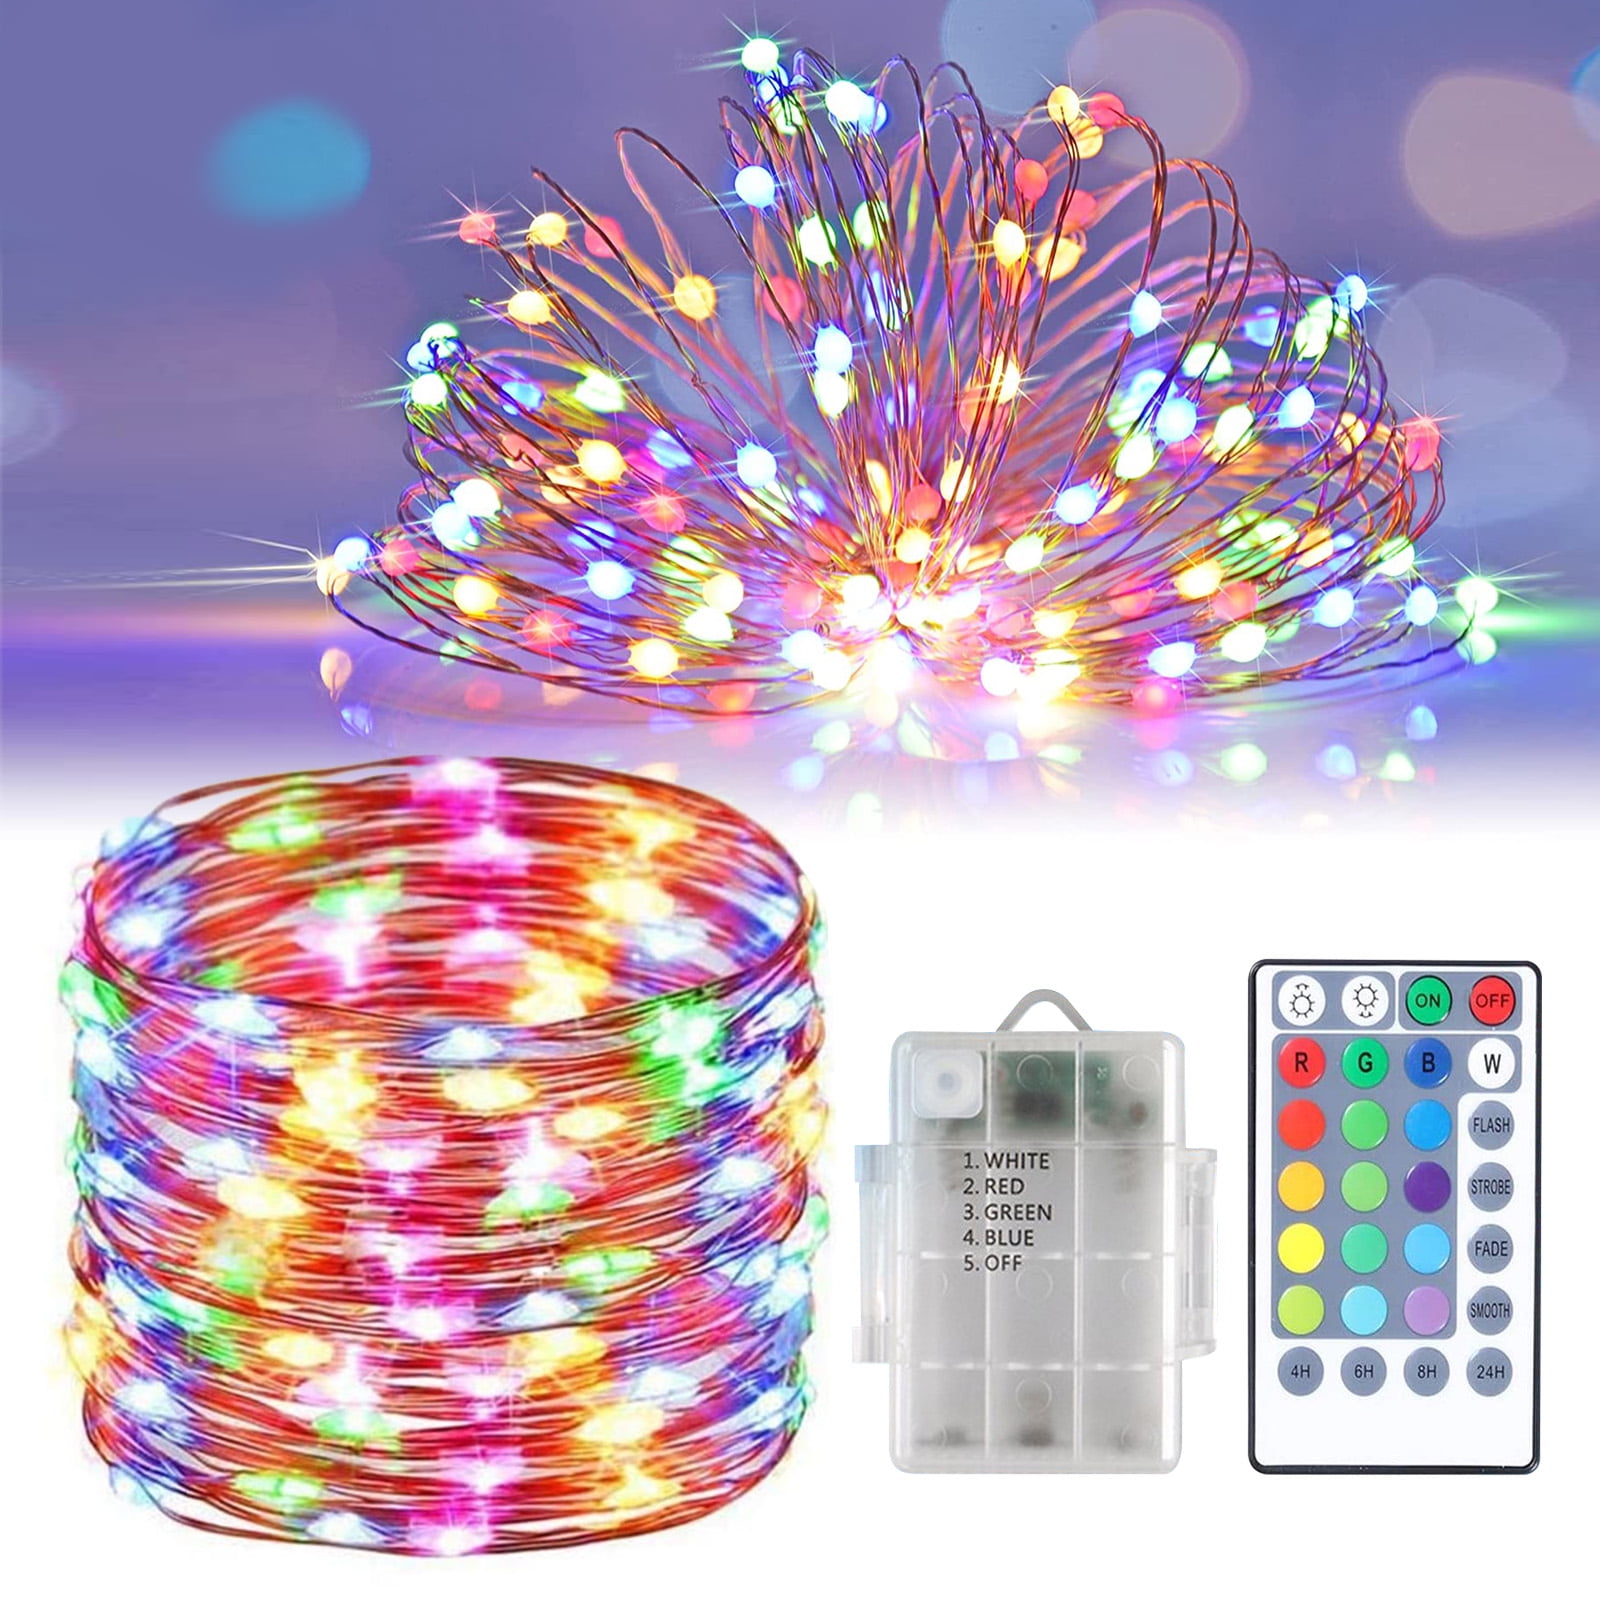 1/3M 10 30 LED Battery String Operated Fairy Light Xmas Light Party Wedding Lamp 